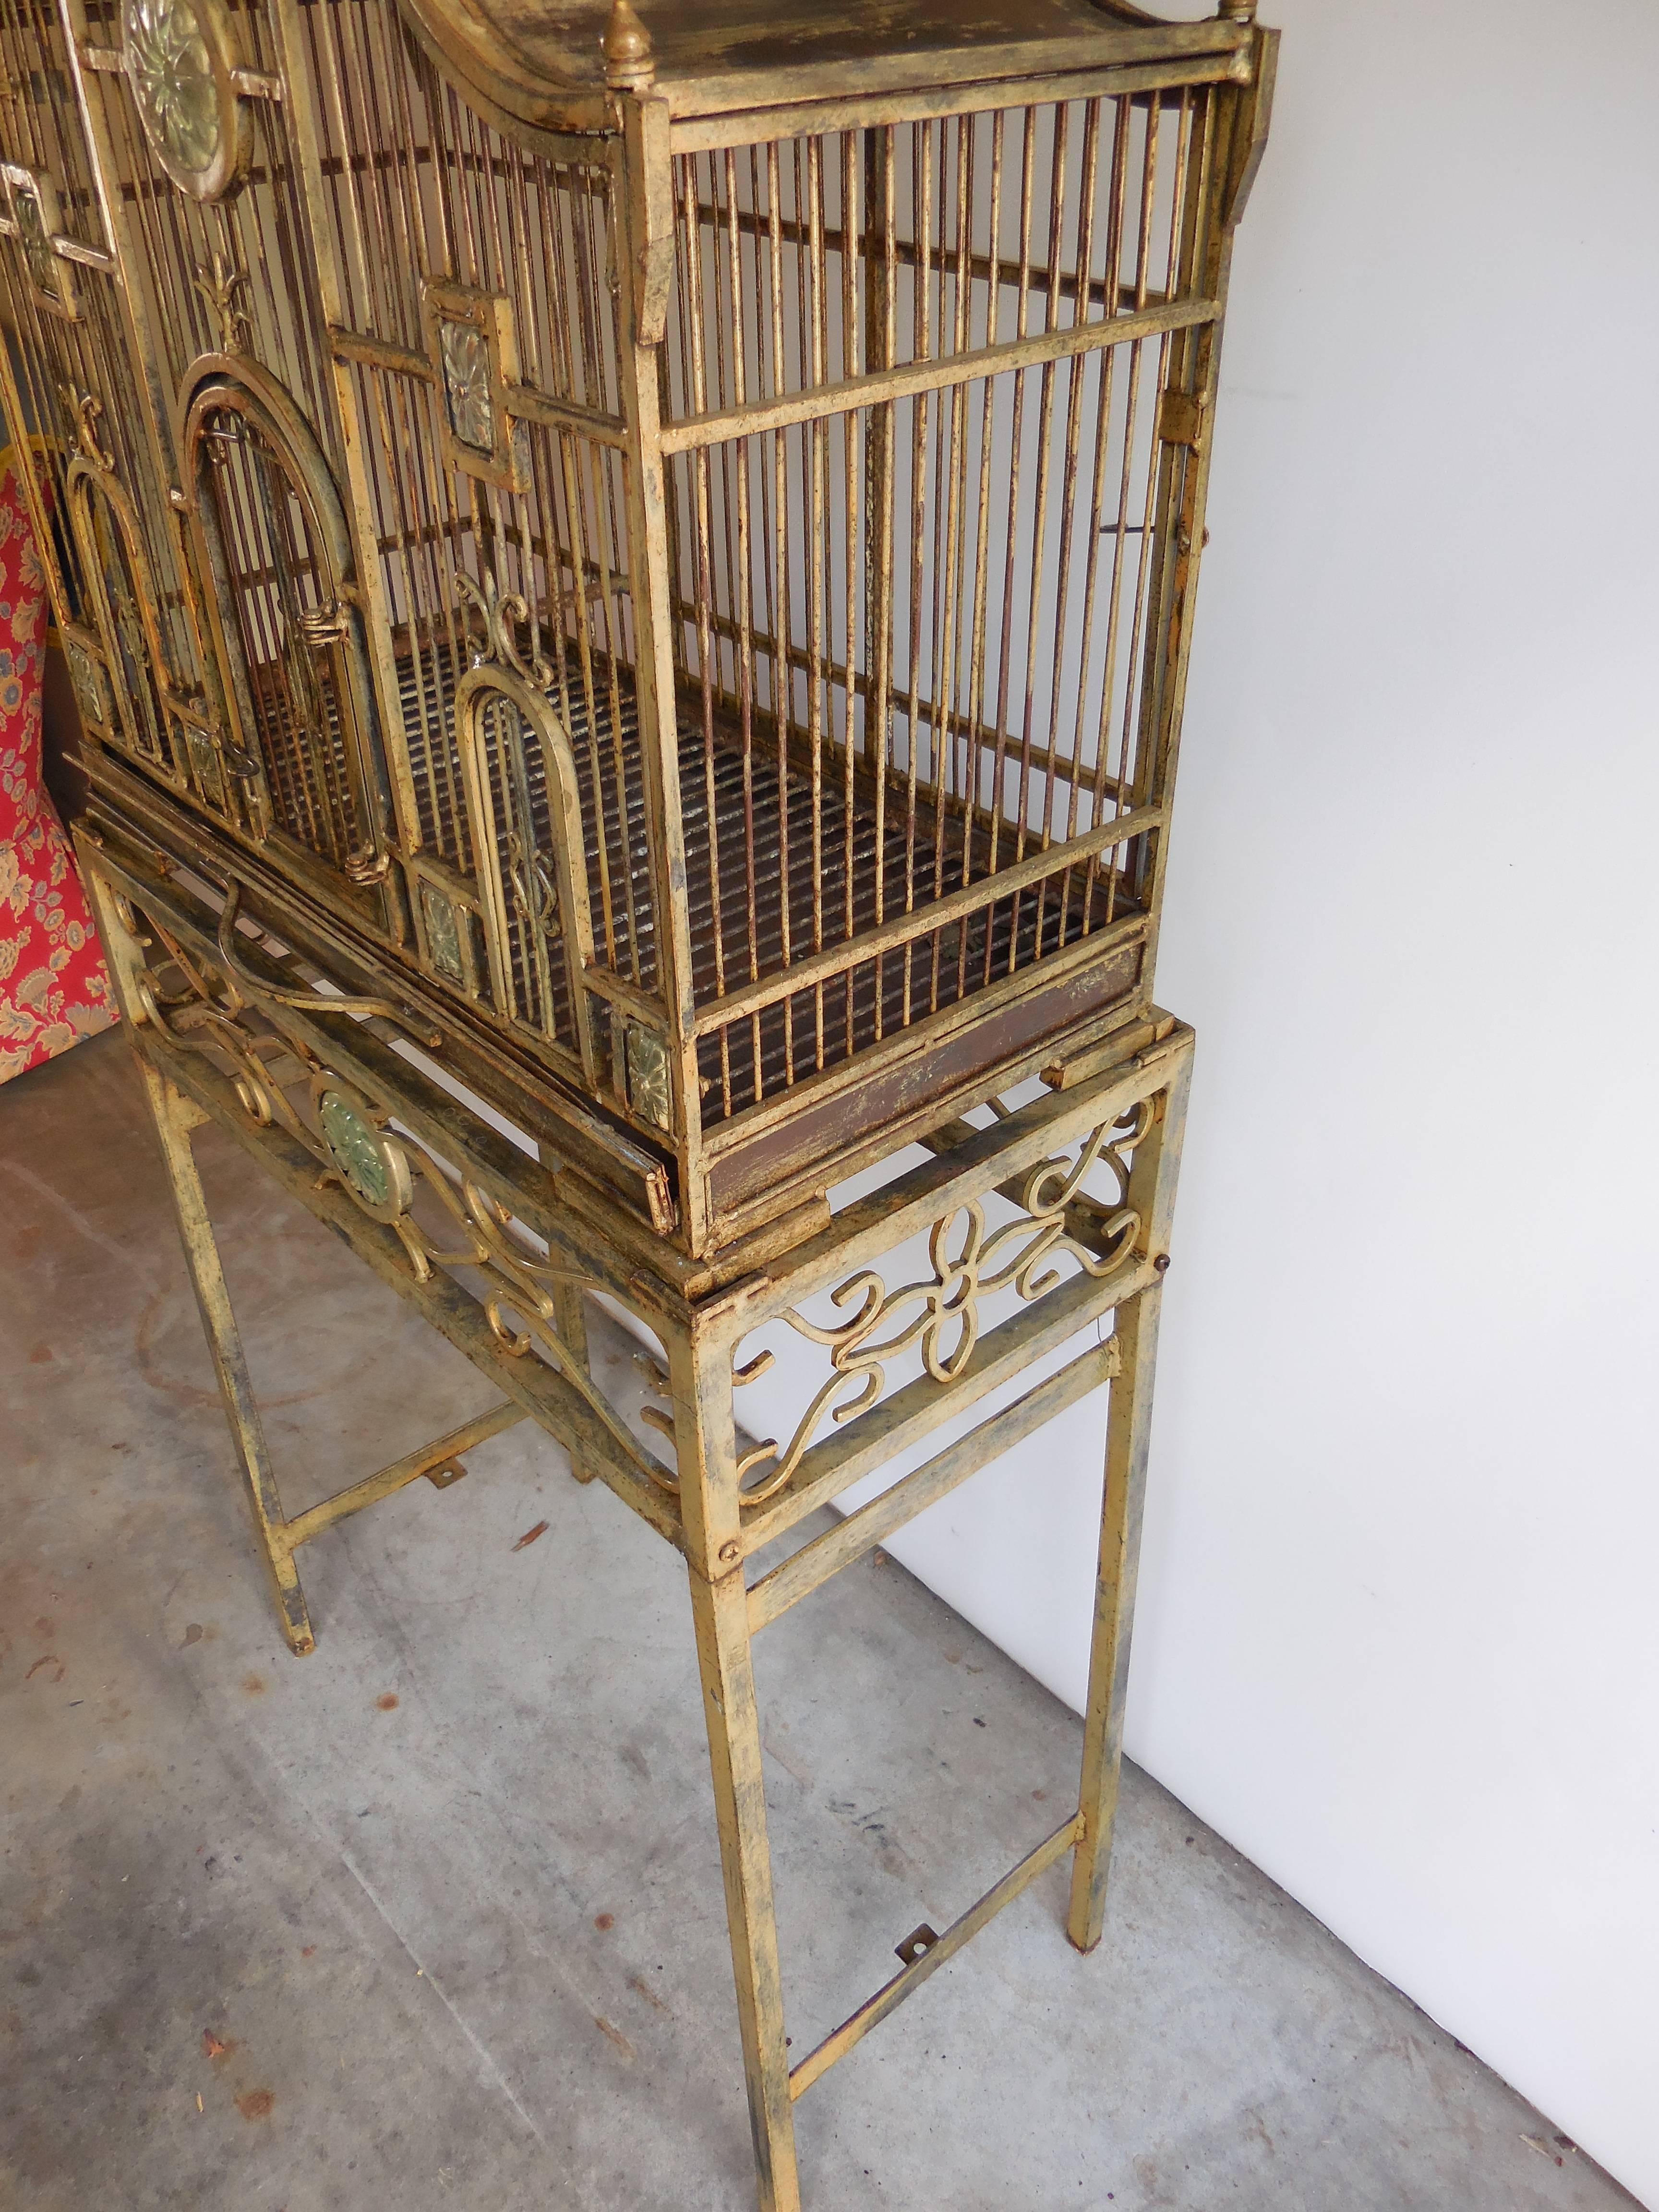 1920s English Birdcage In Good Condition For Sale In West Palm Beach, FL